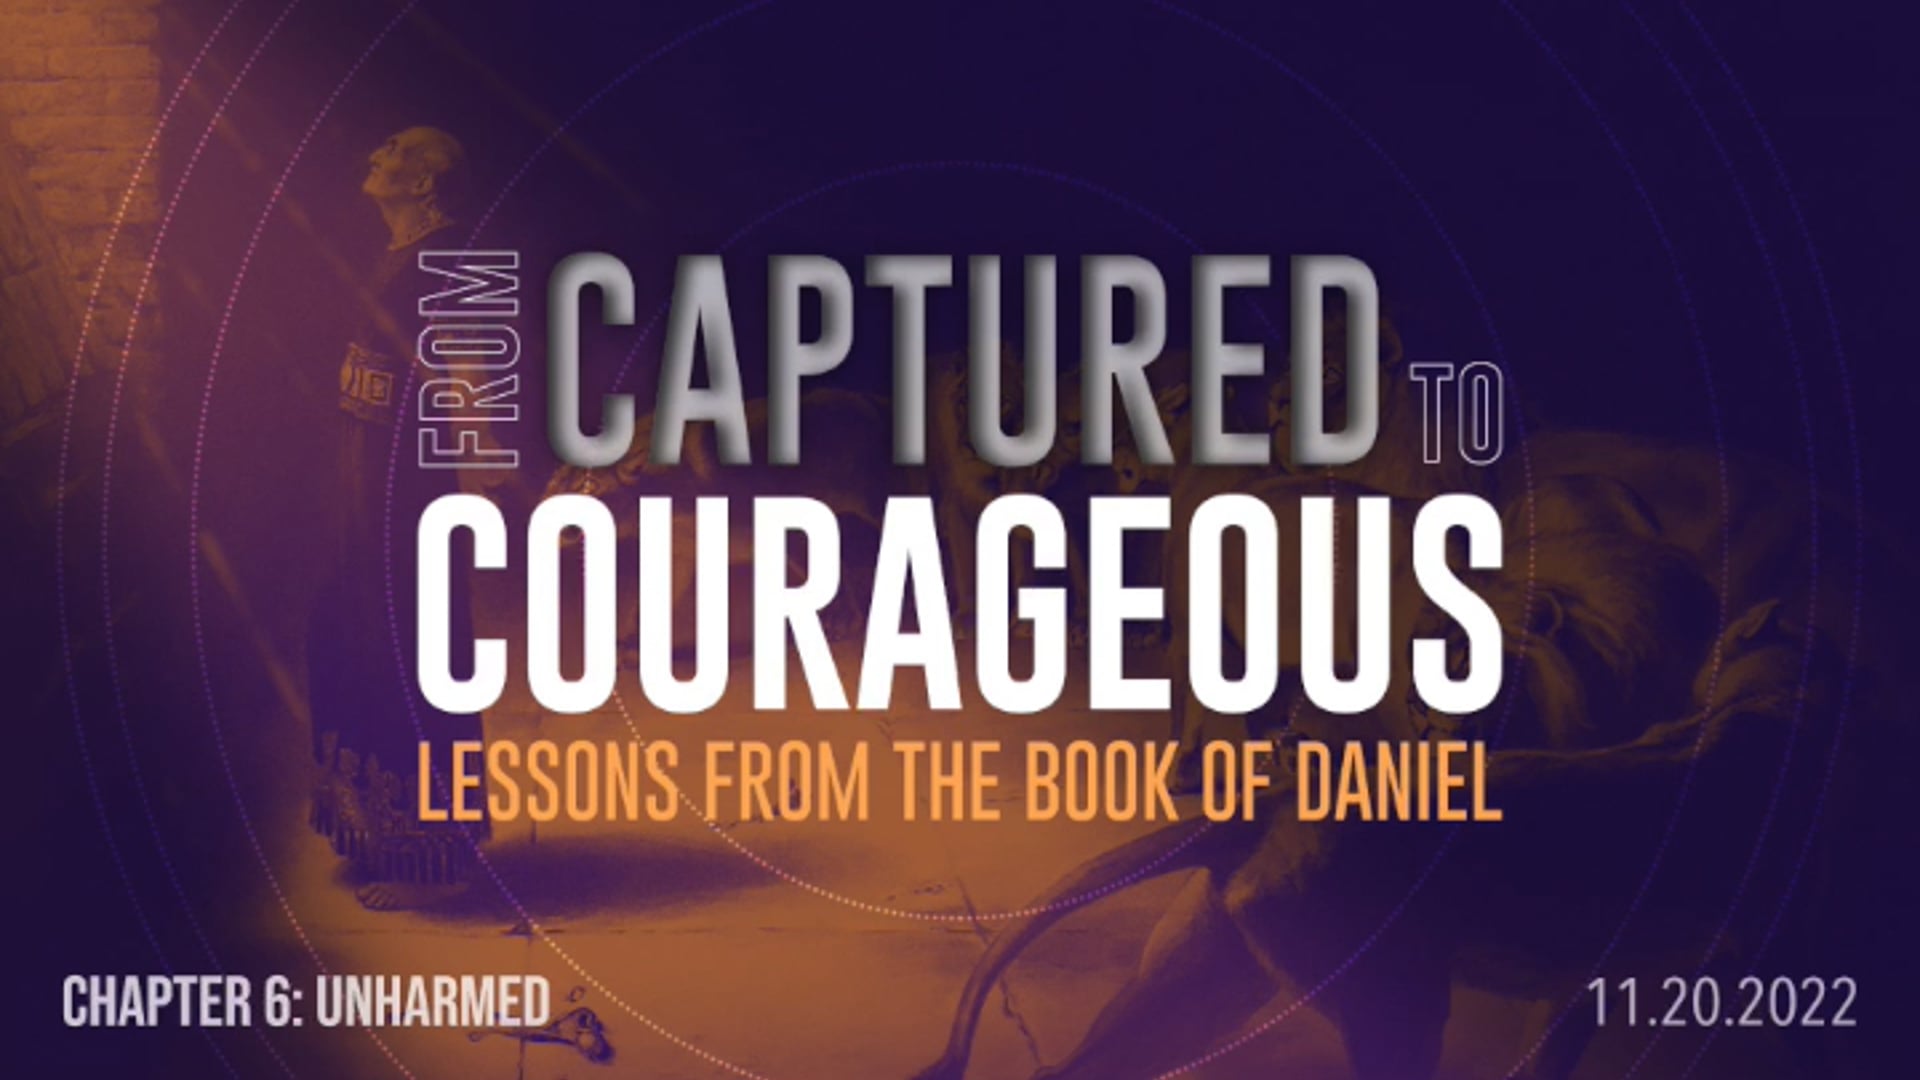 From Captured to Courageous - Part 6: Unharmed